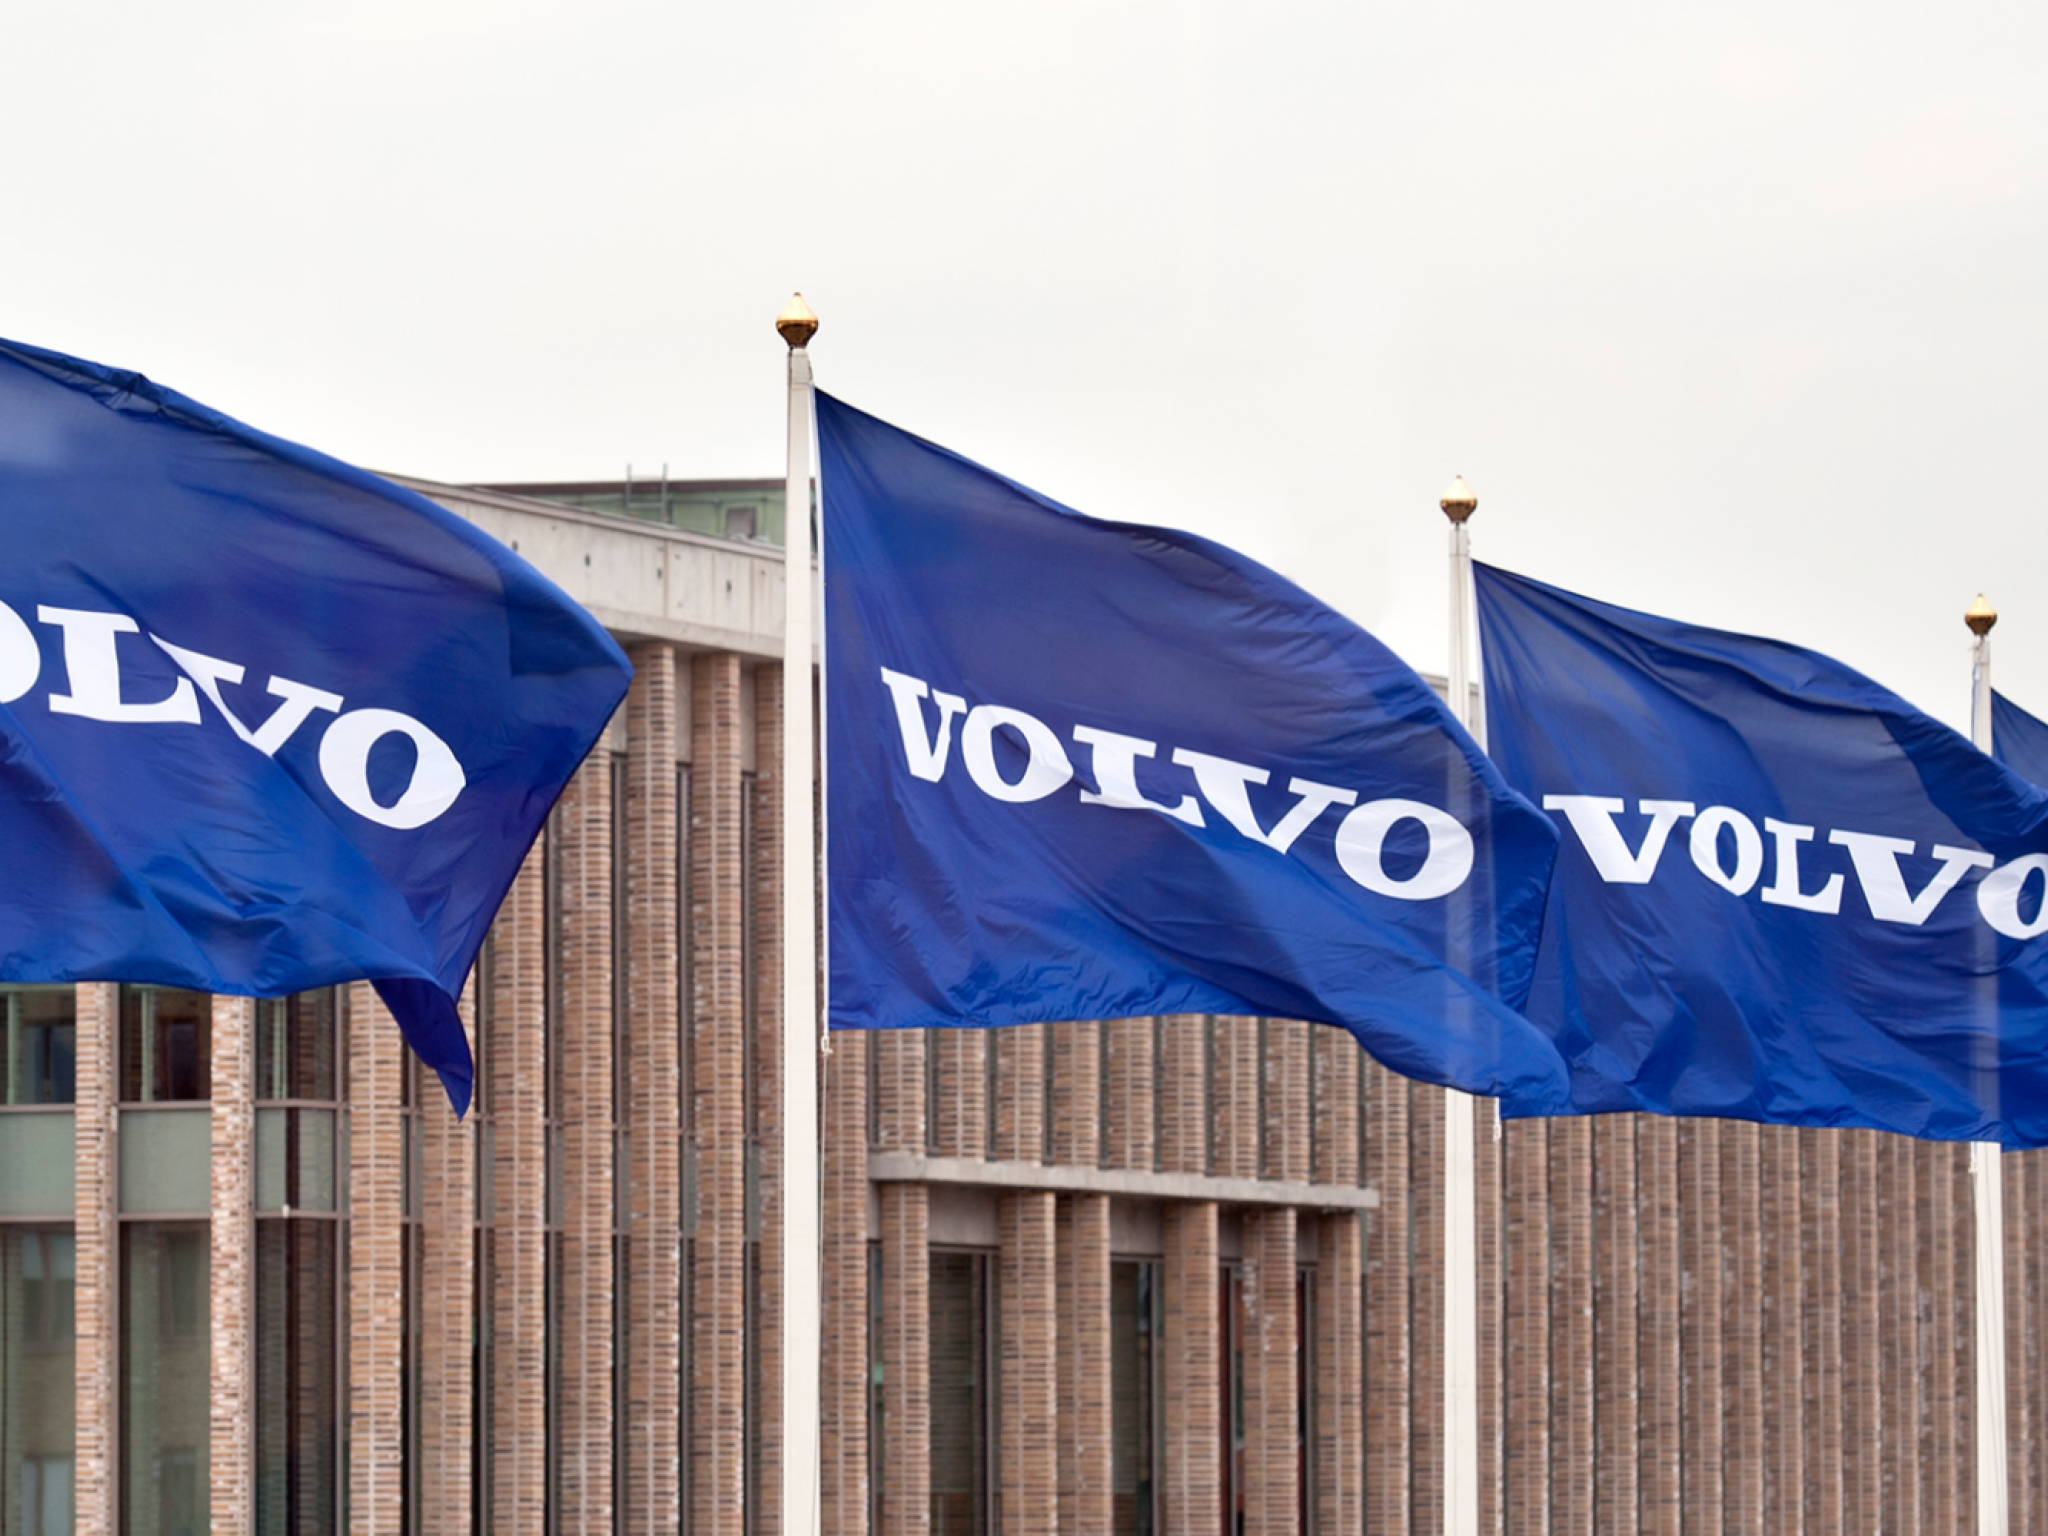  volvo-posts-q3-sales-growth-of-15-on-higher-deliveries 